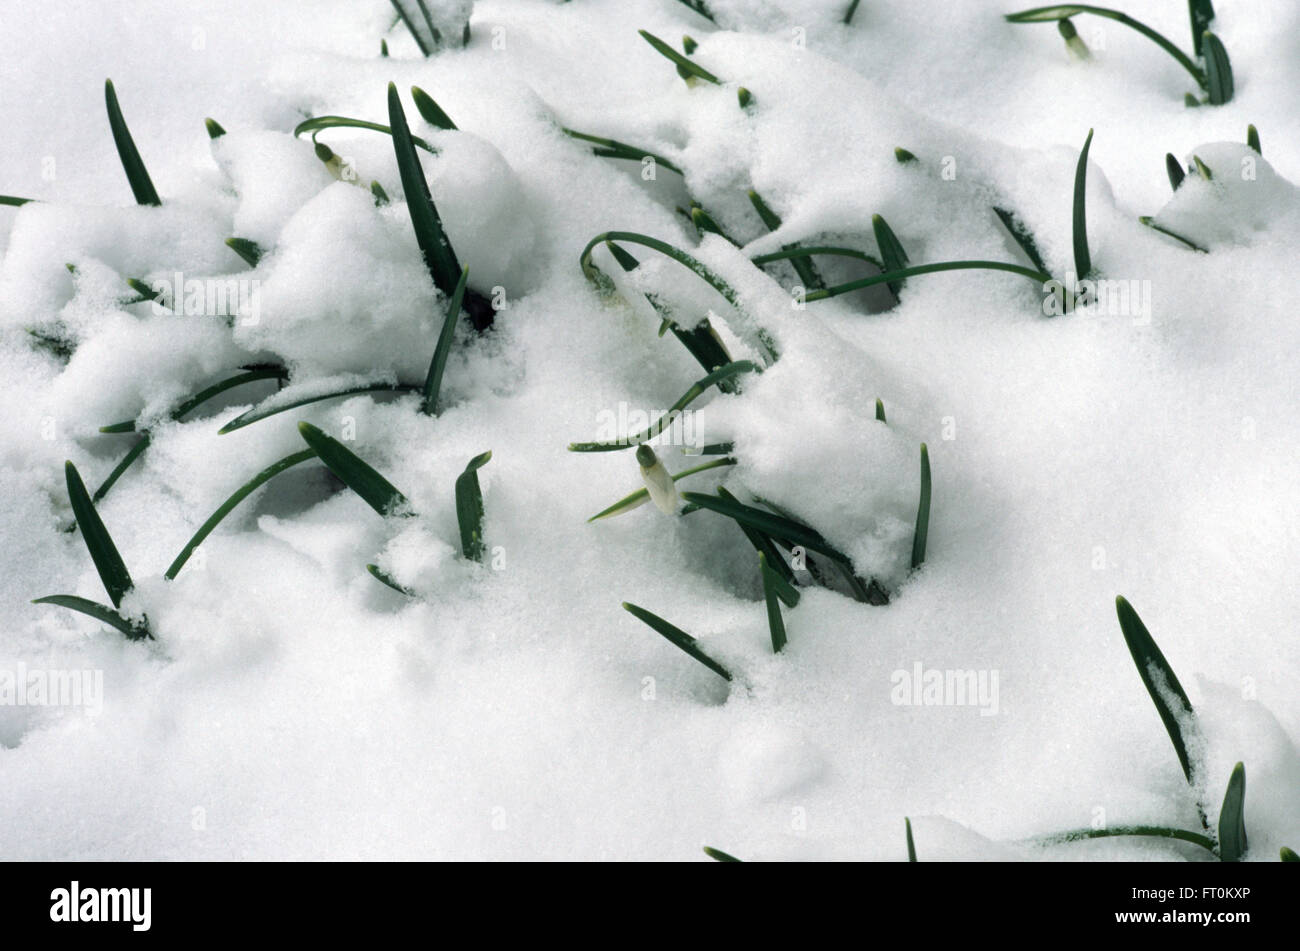 Close-up of snowdrops emerging from snow Stock Photo